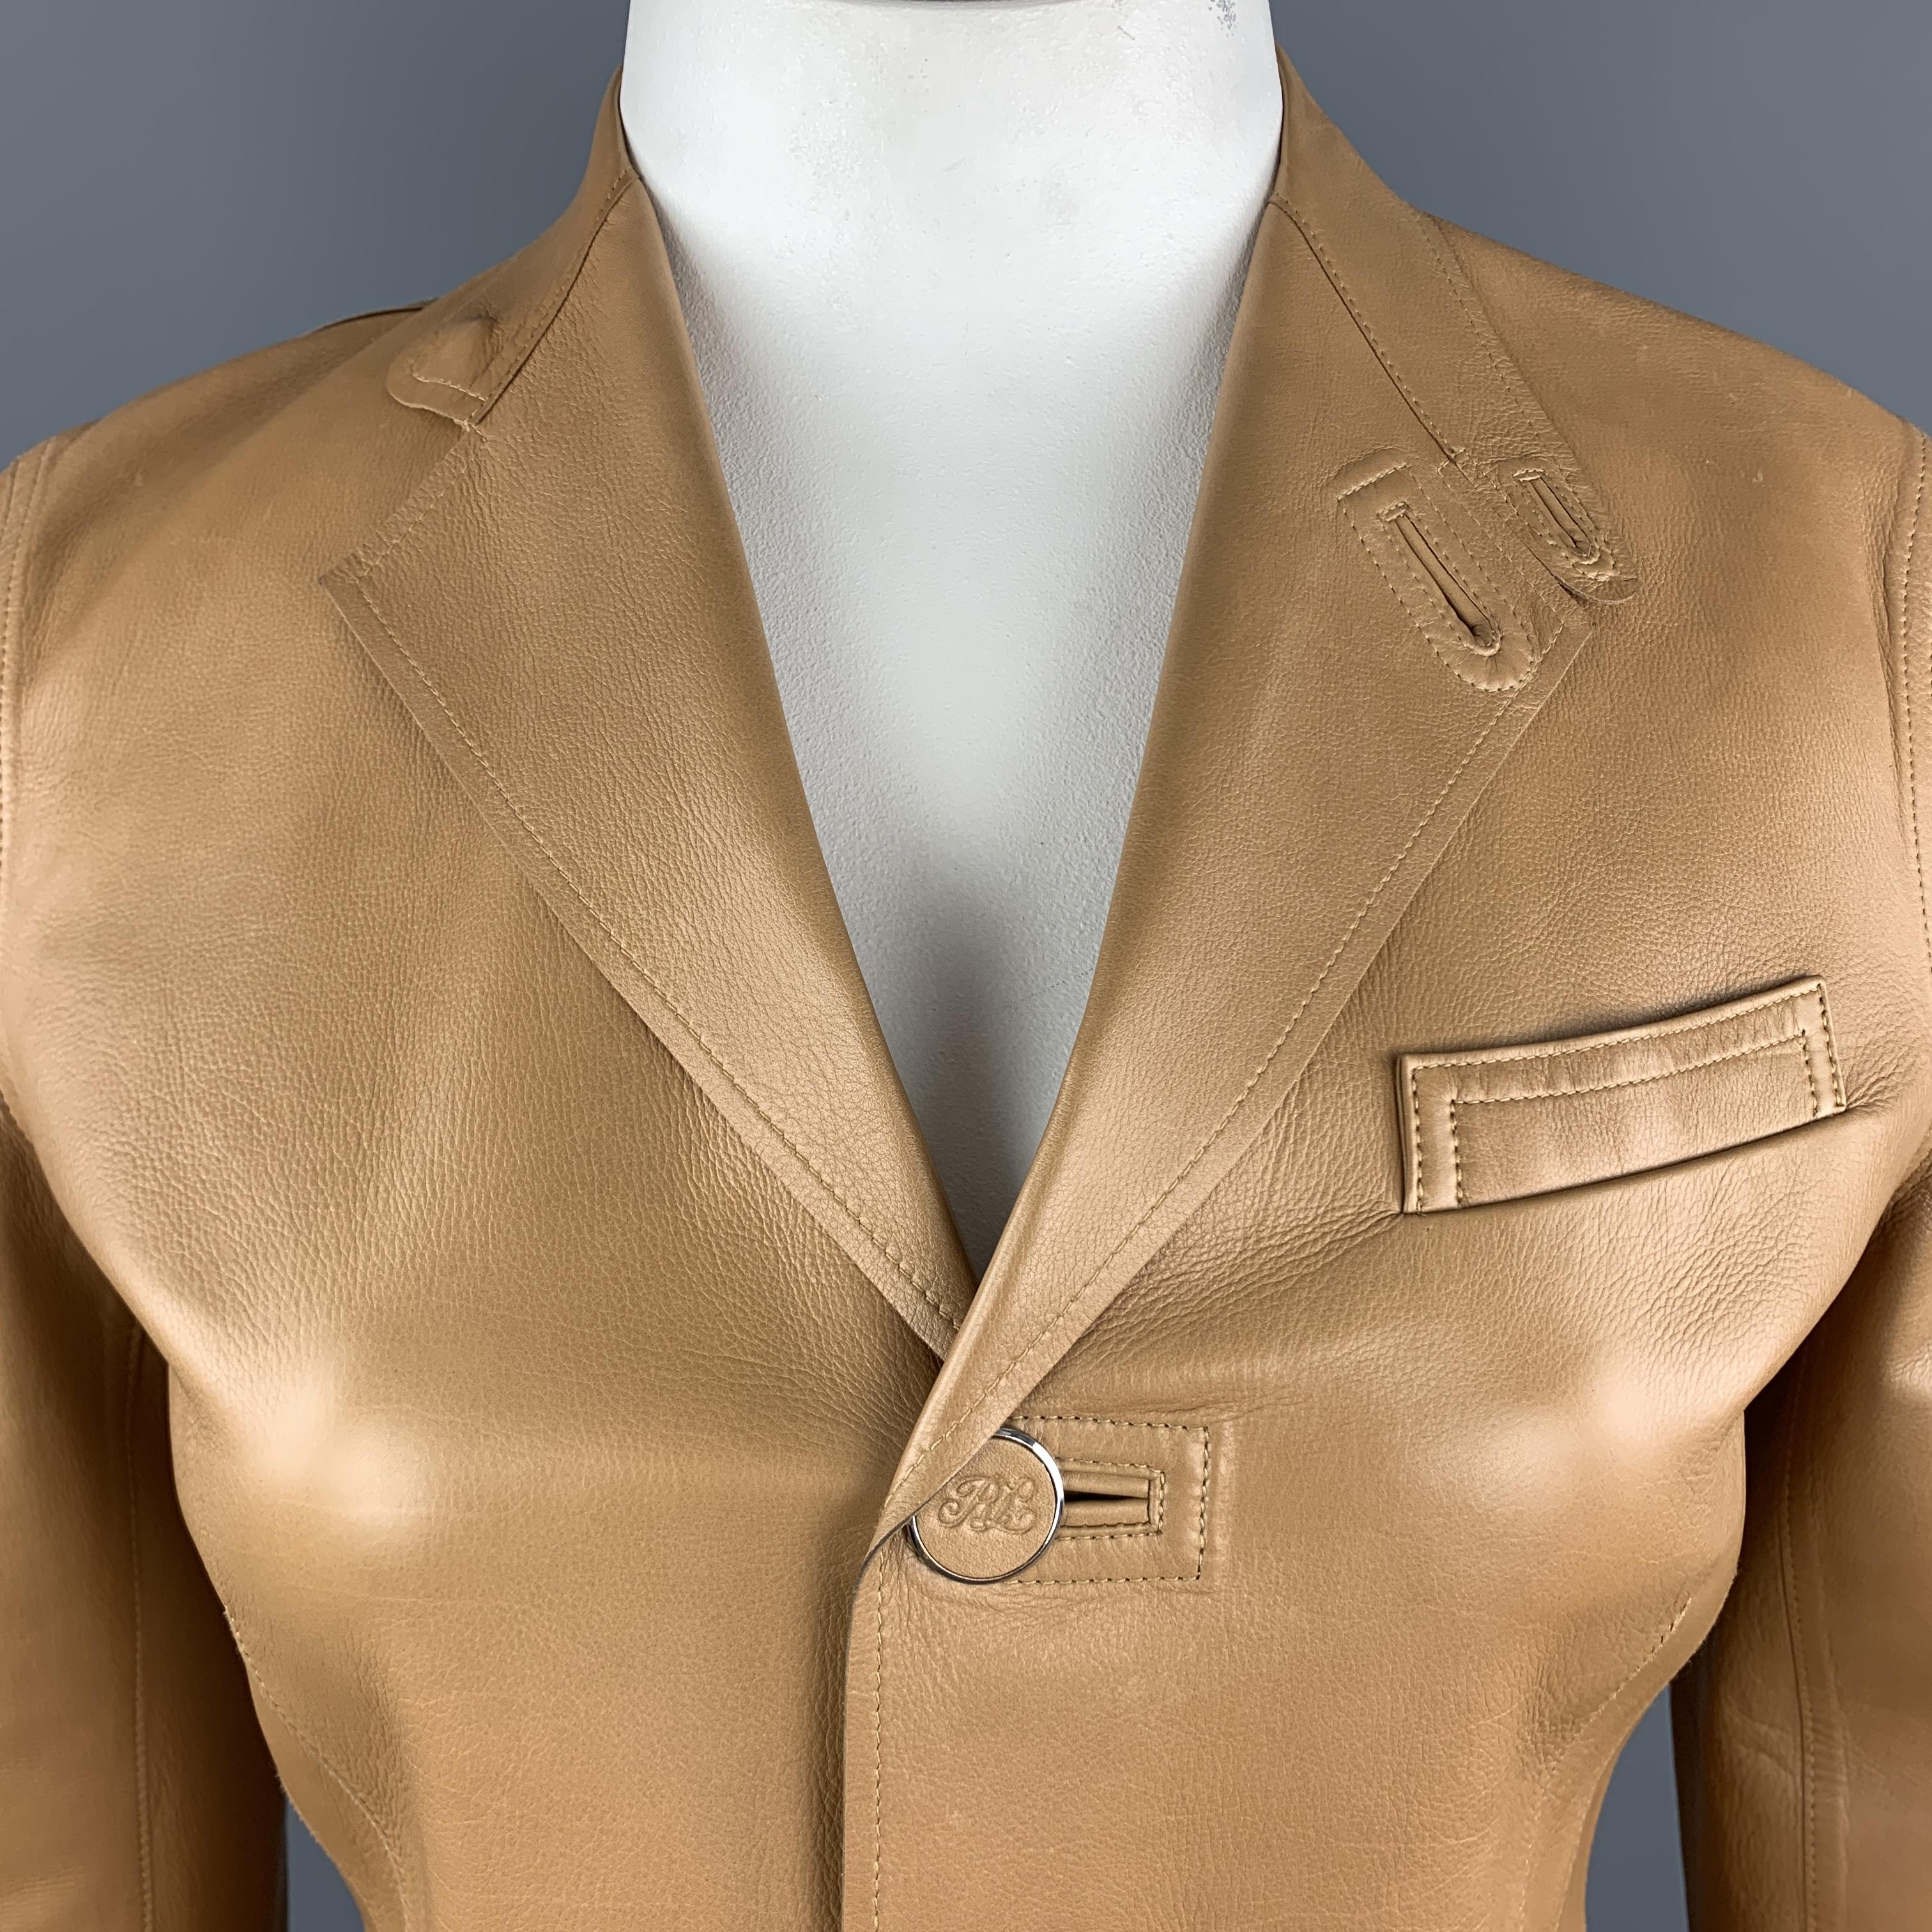 RALPH LAUREN Back Label blazer jacket comes in caramel tan leather with a three button single breasted front, notch tab lapel, slanted pockets, and embossed buttons. Wear and marks throughout. As-is. 

Fair Pre-Owned Condition.
Marked: